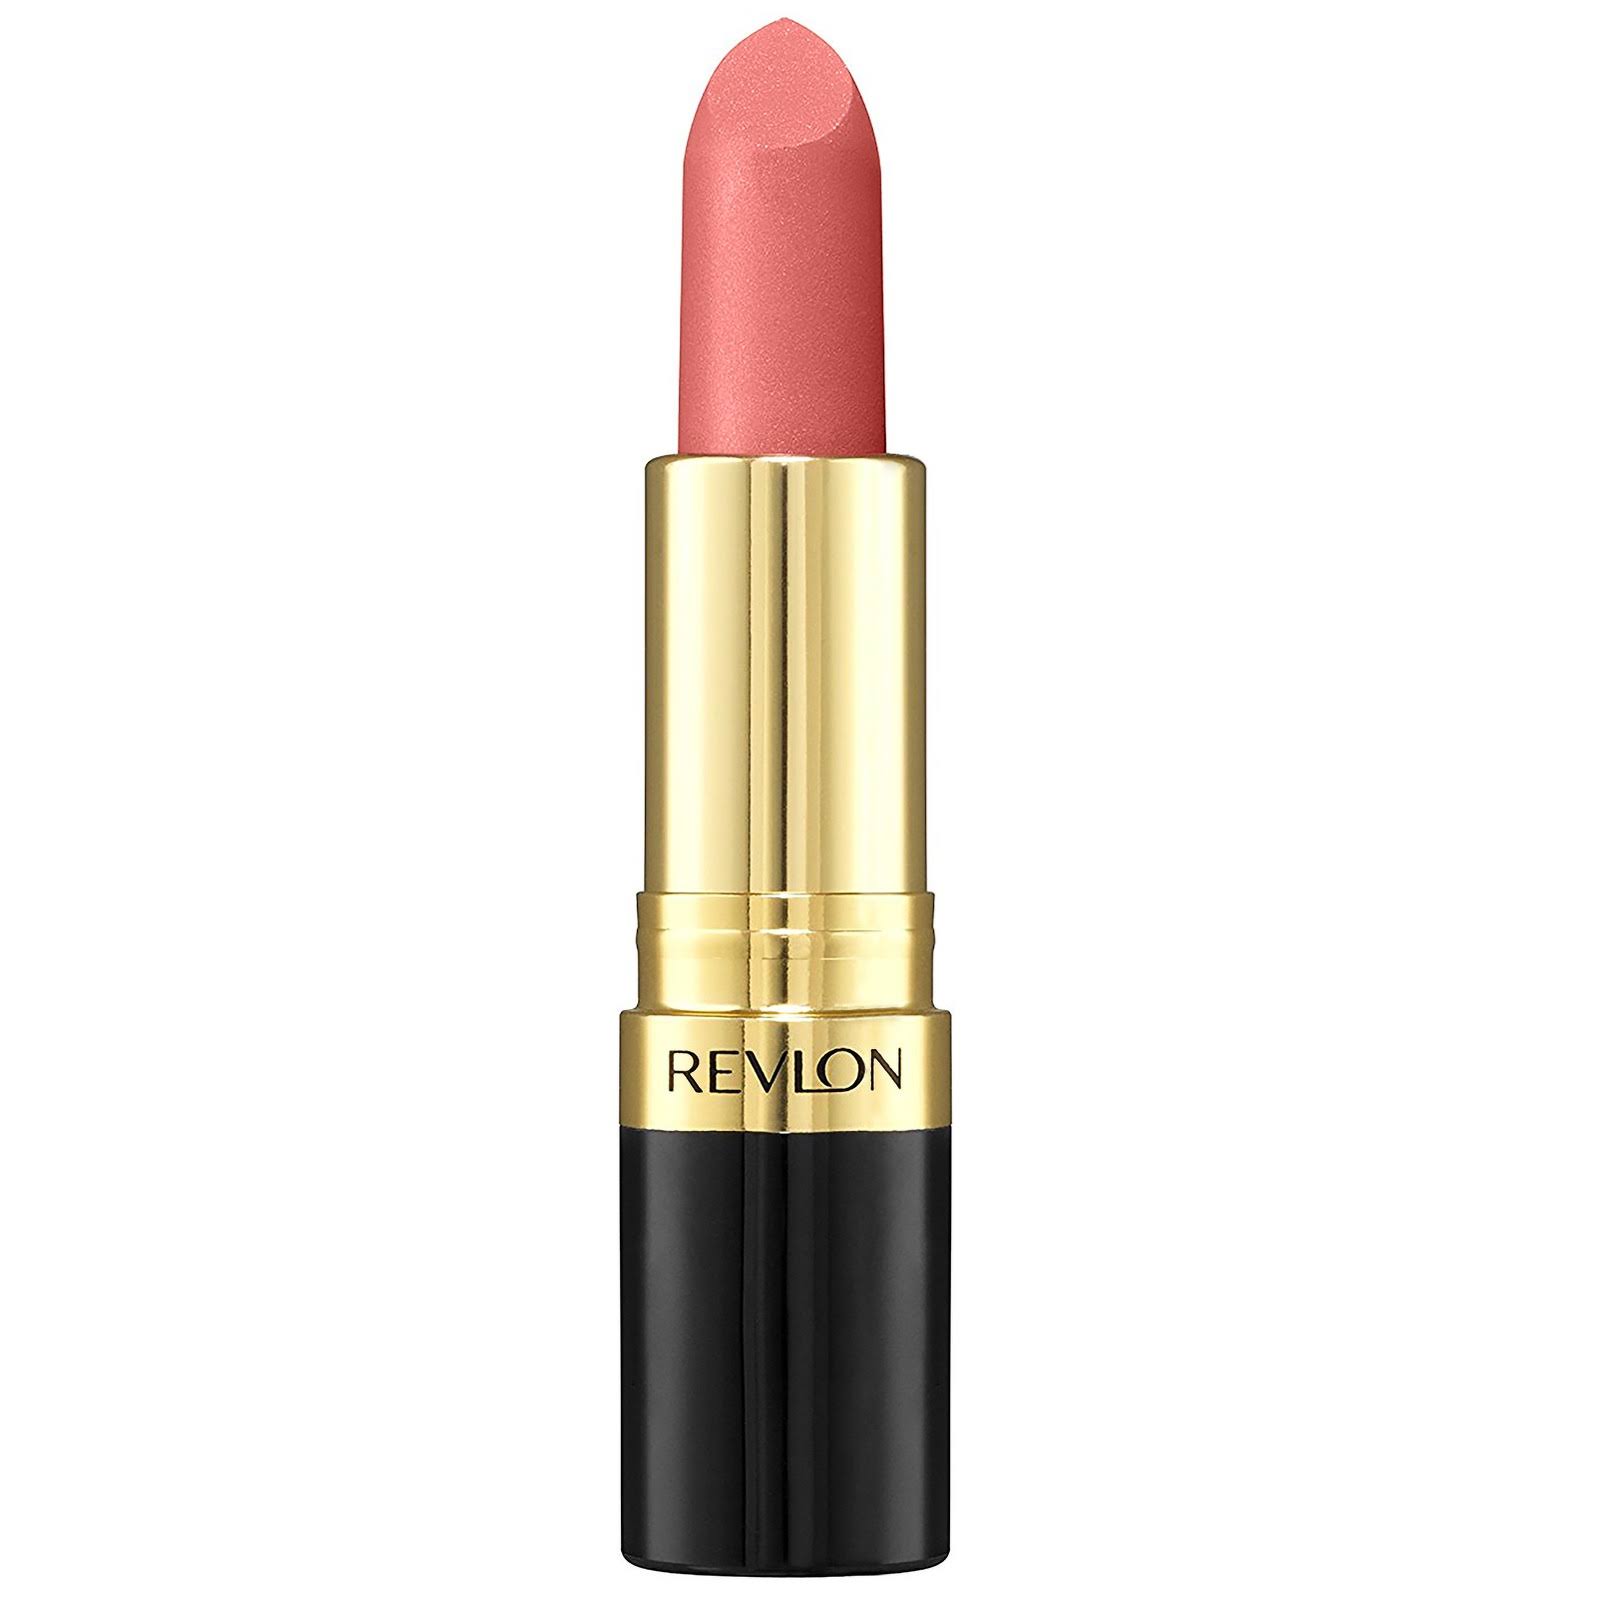 Revlon Super Lustrous Lipstick - Creme Pink In The Afternoon